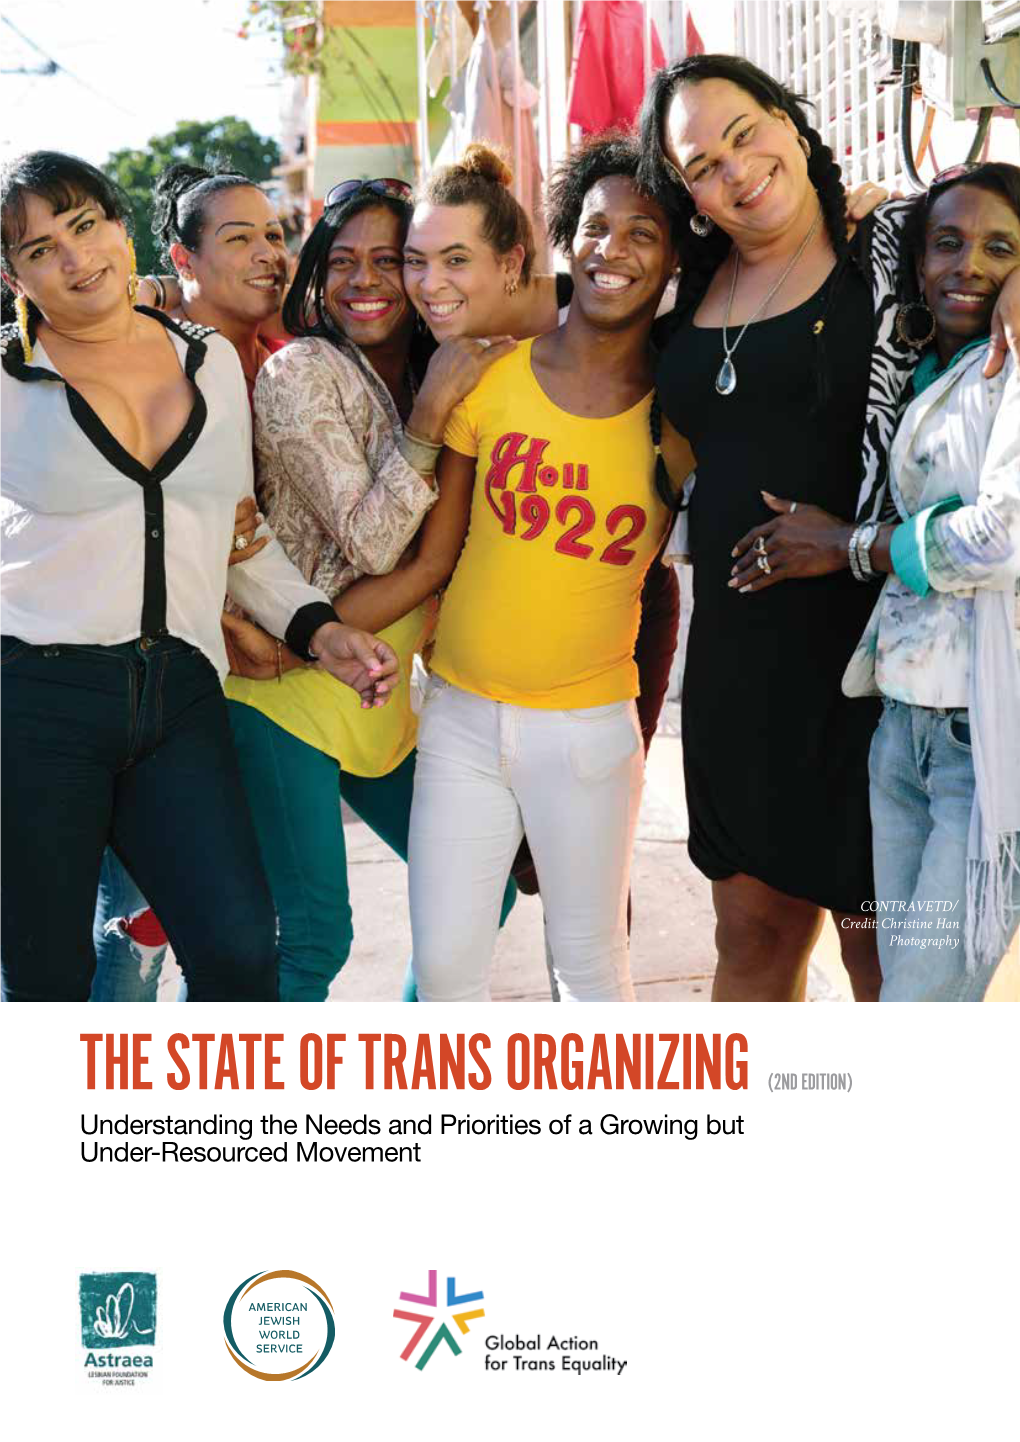 THE STATE of TRANS ORGANIZING (2ND EDITION) Understanding the Needs and Priorities of a Growing but Under-Resourced Movement ACKNOWLEDGEMENTS and SUGGESTED CITATION